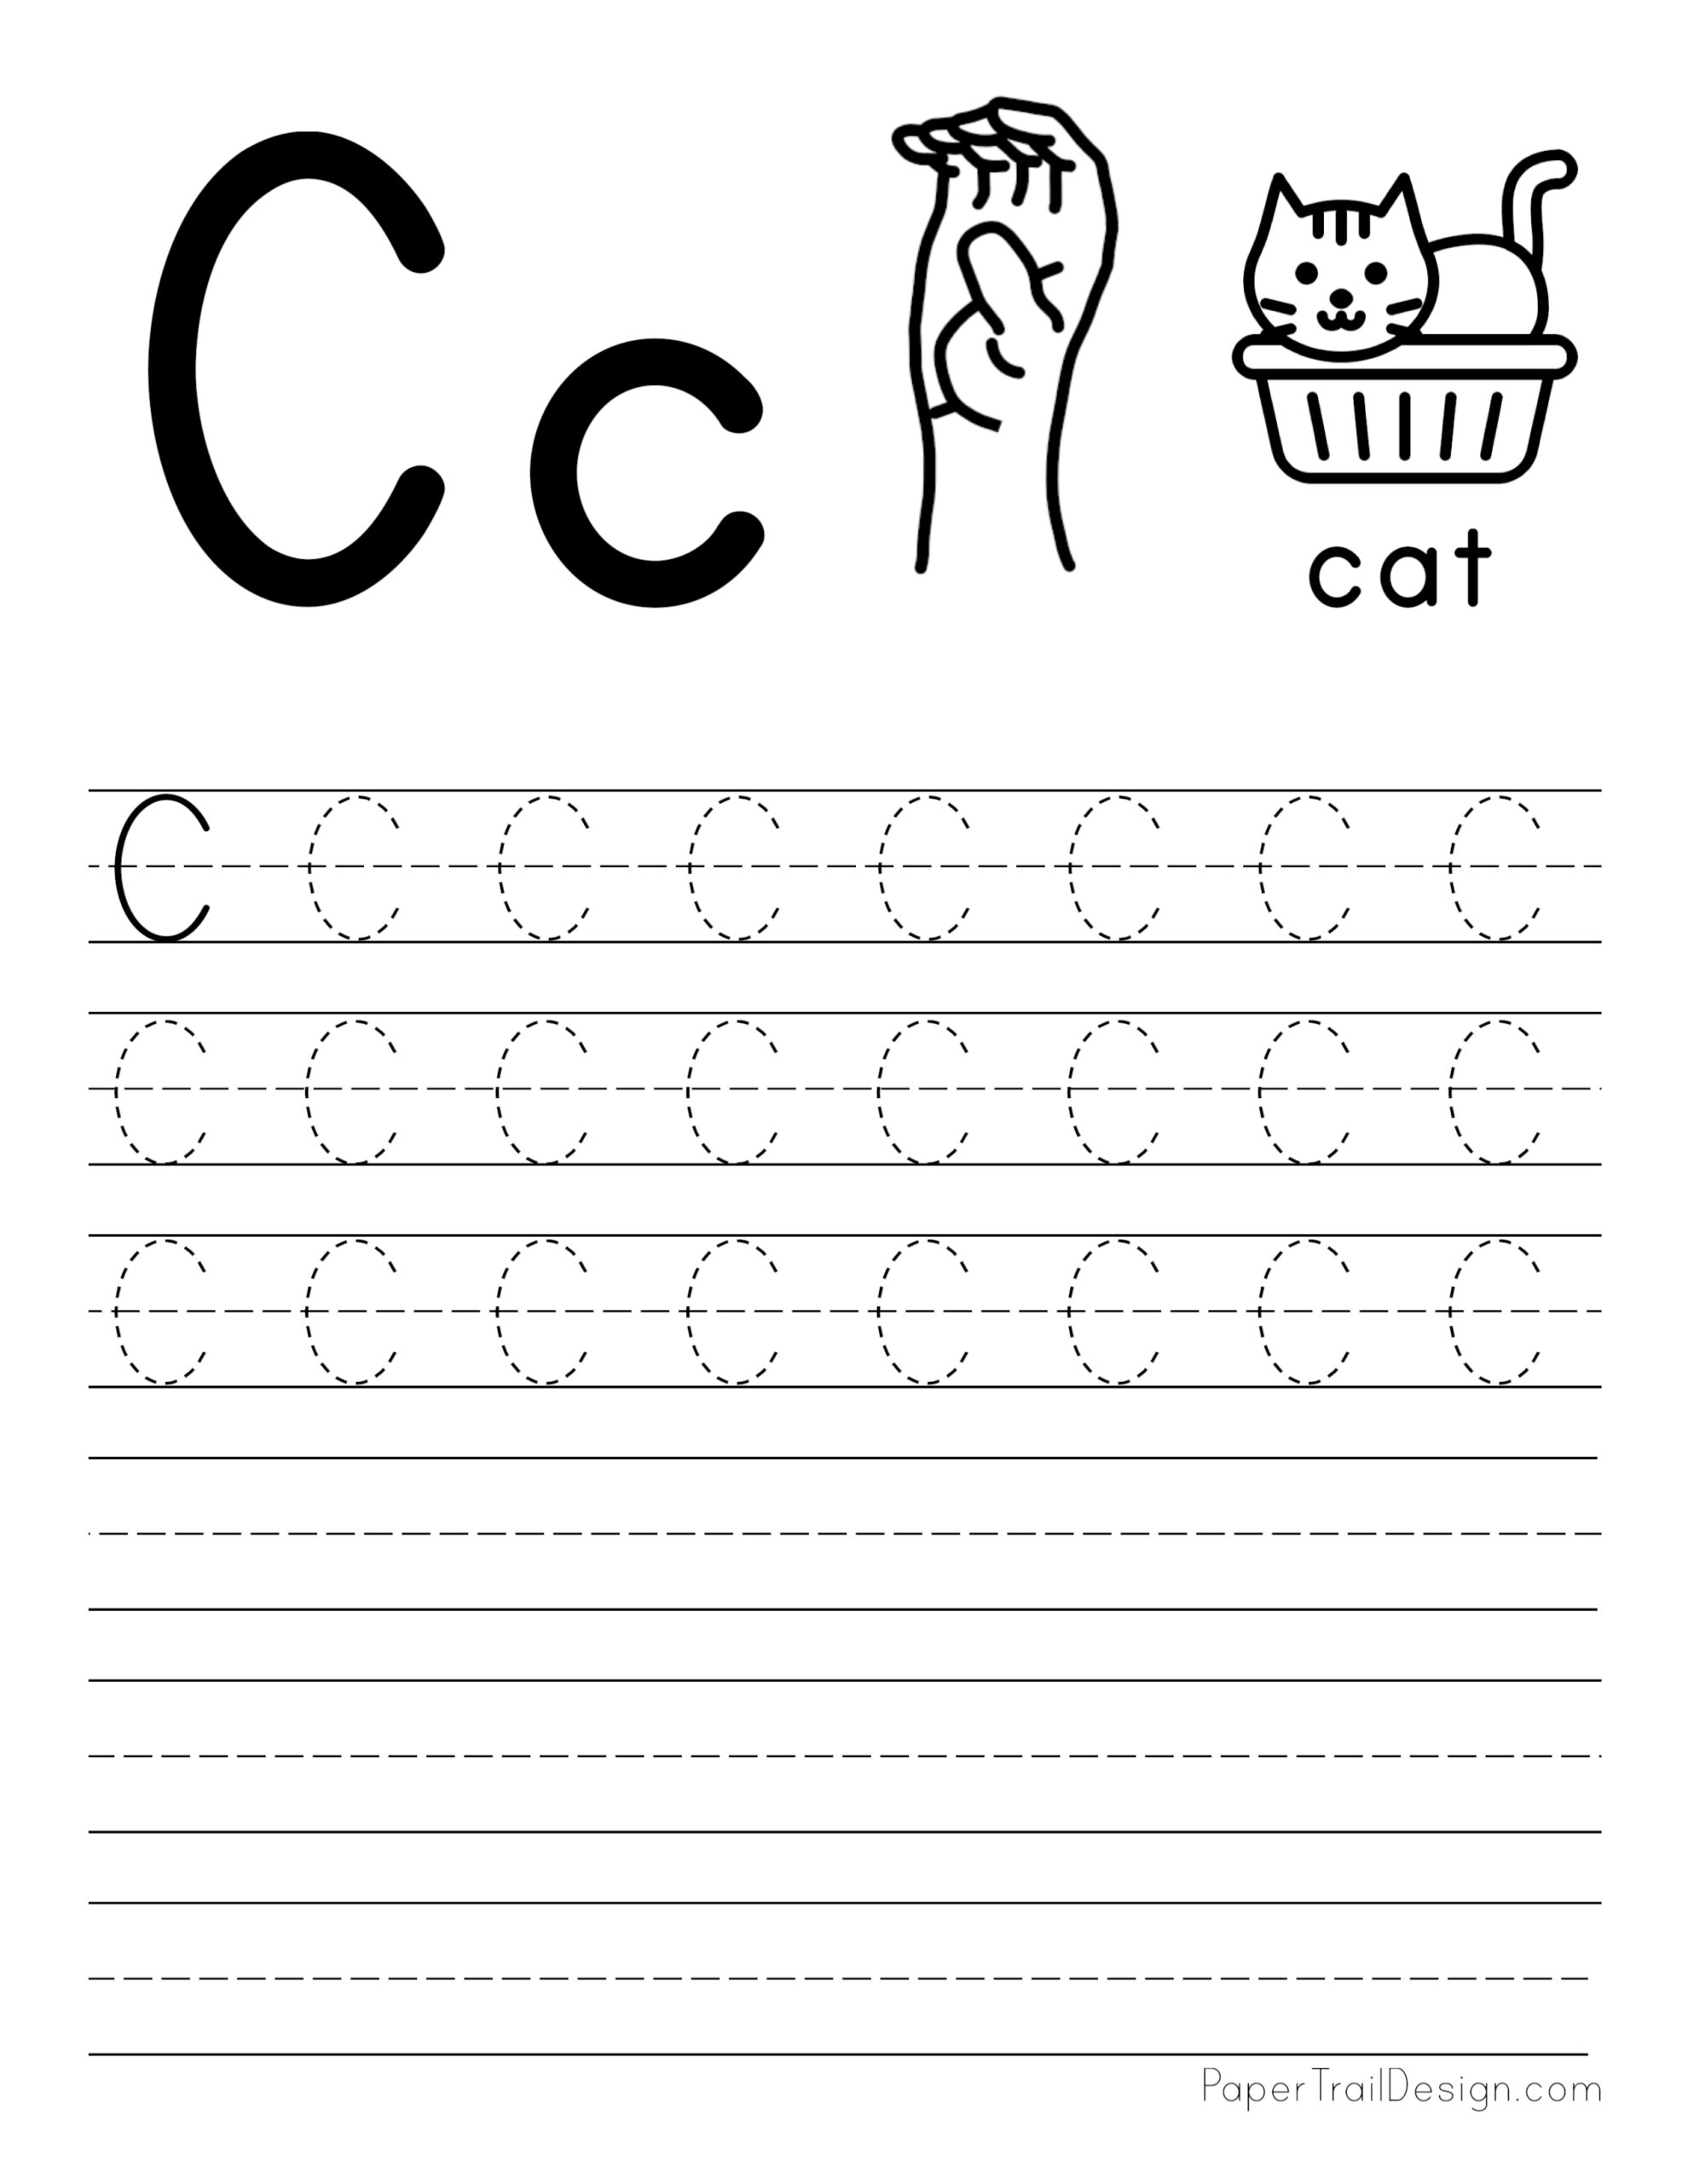 Free Letter Tracing Worksheets | Paper Trail Design